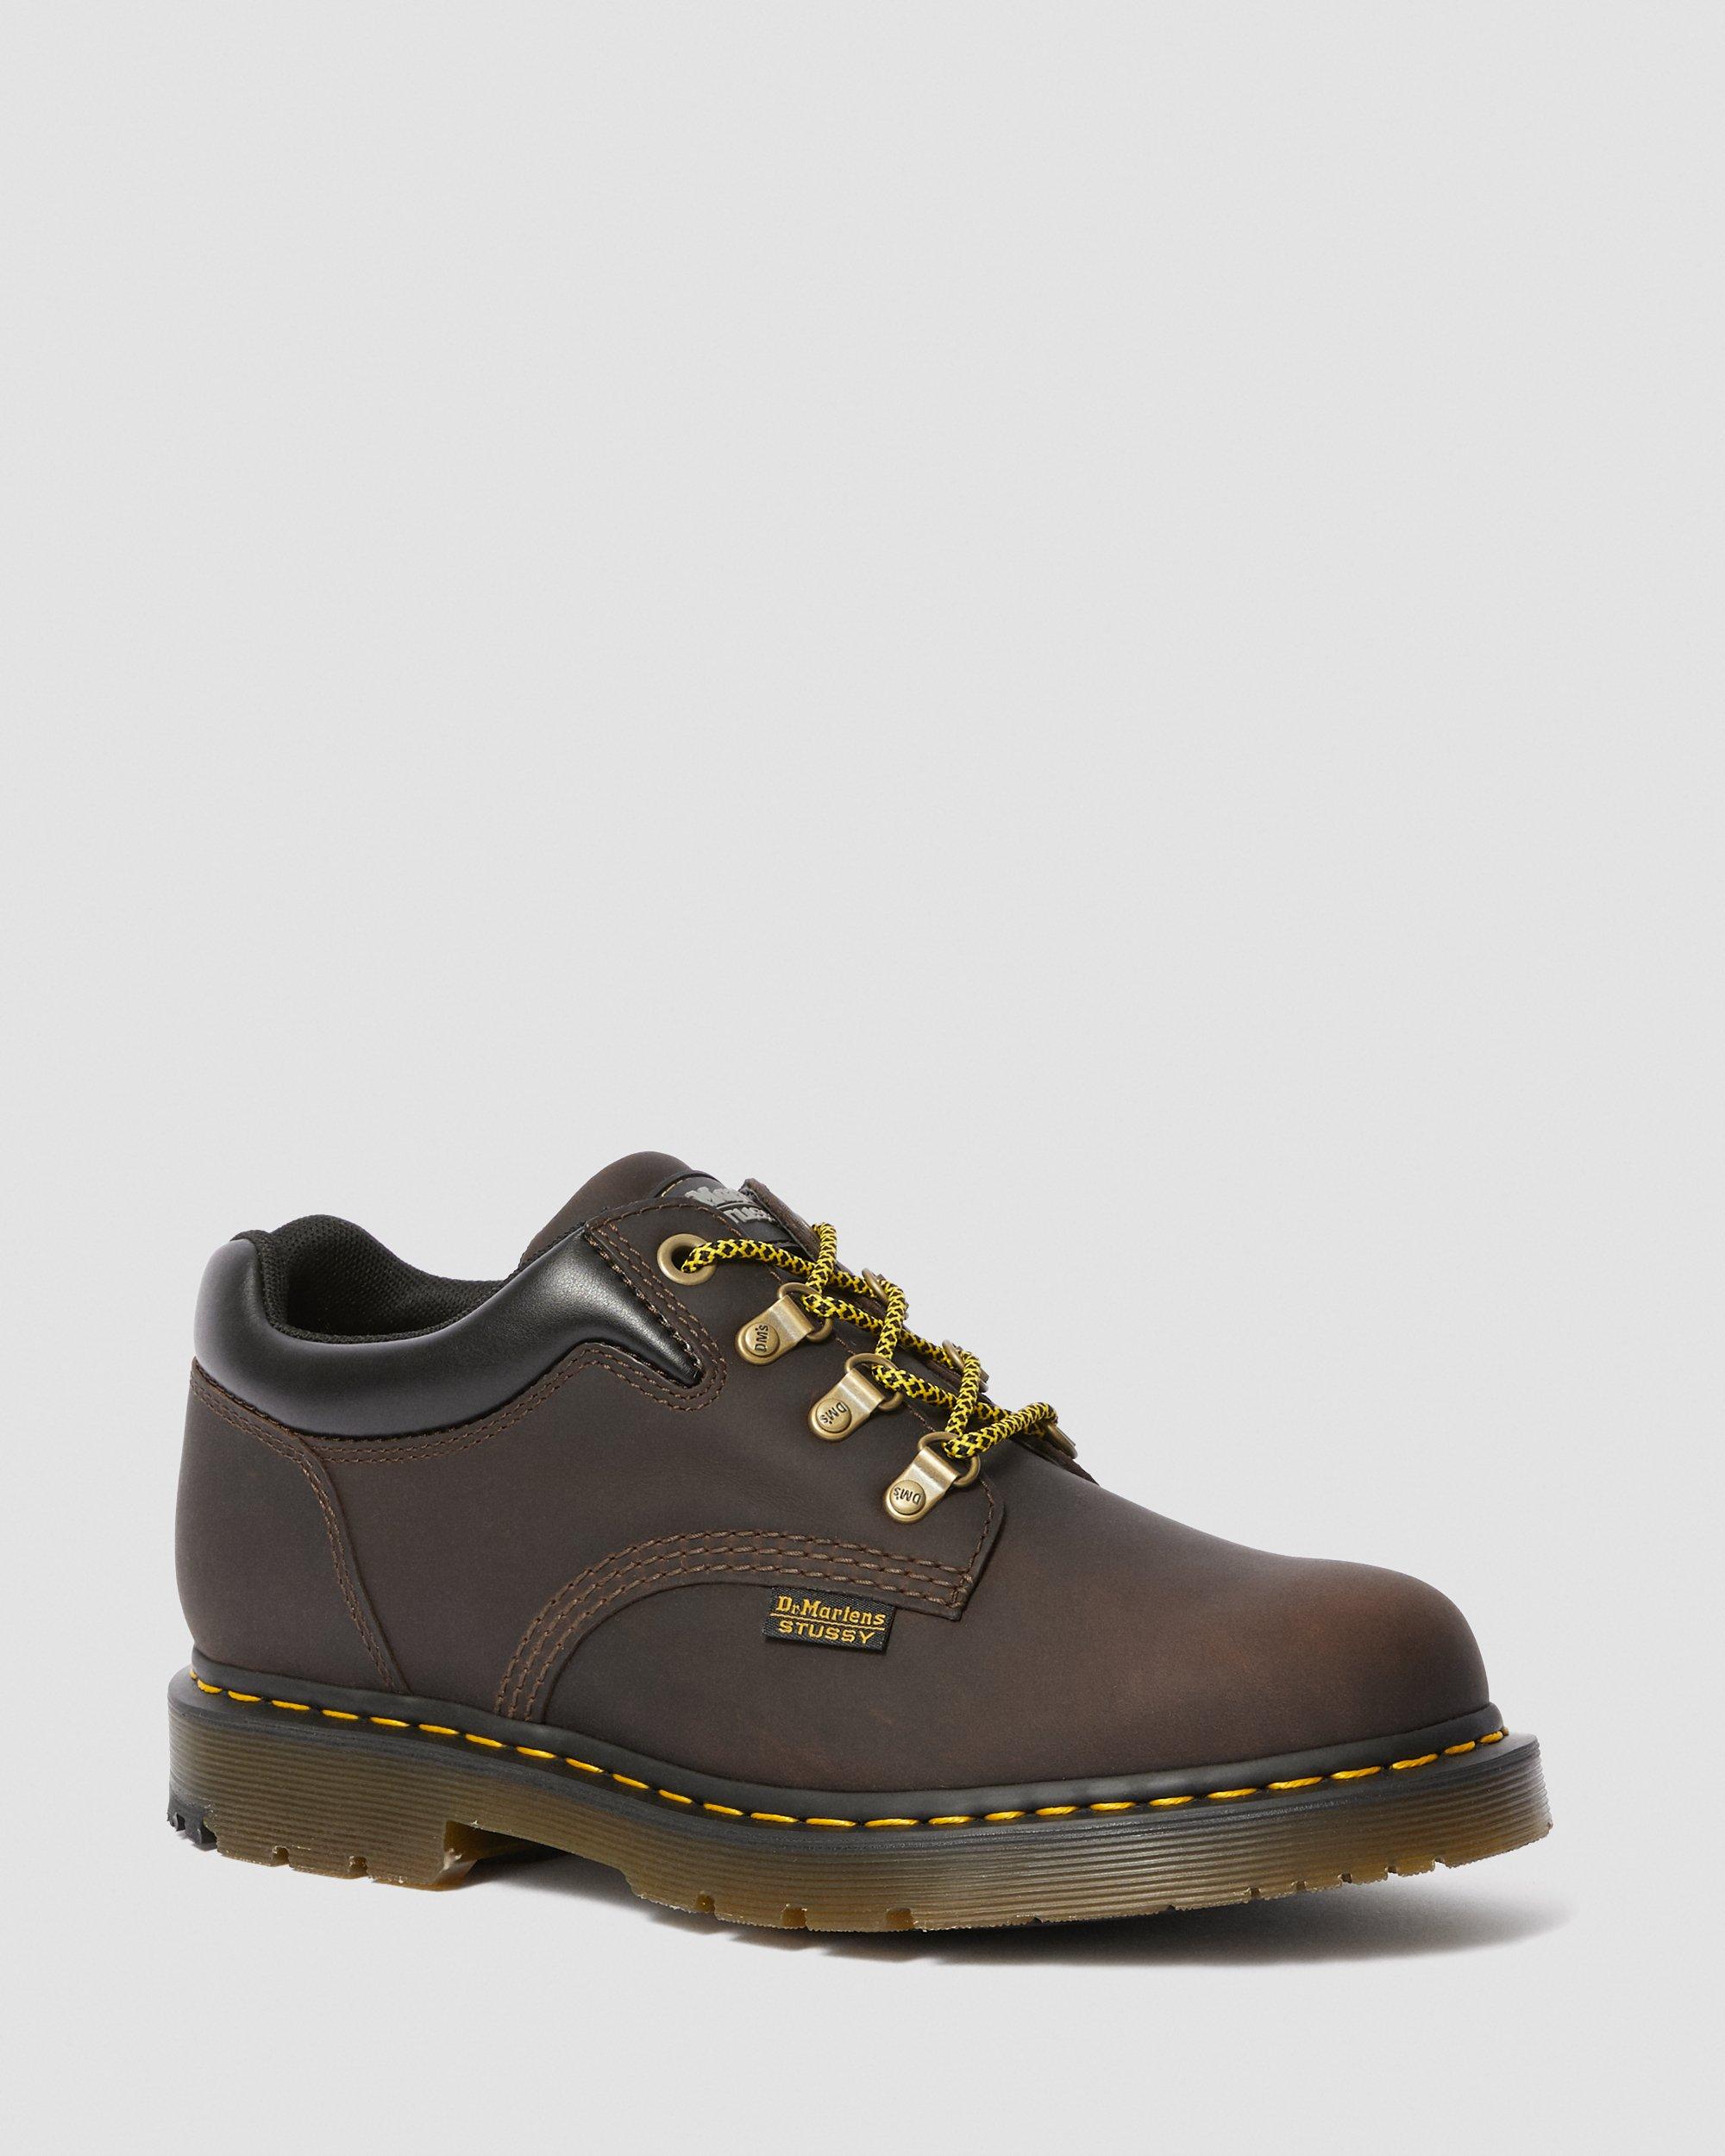 Stϋssy 8053 Hy DM's Wintergrip Shoes | Dr. Martens